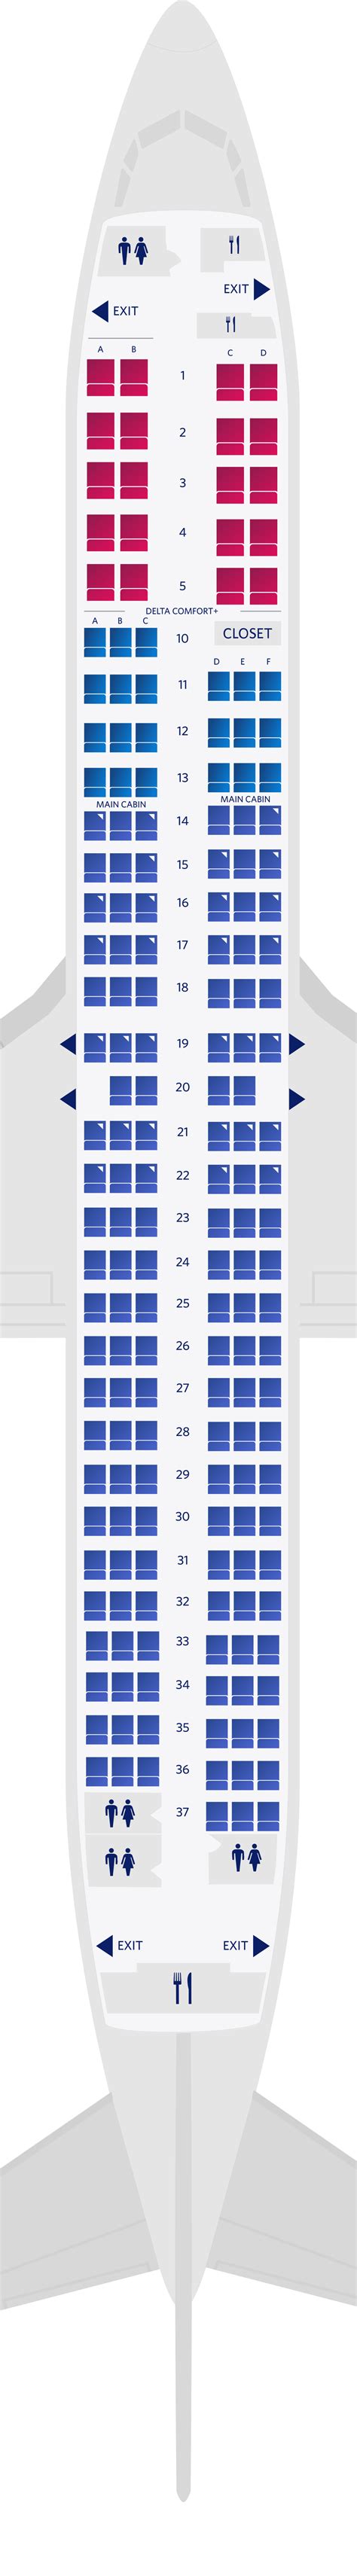 For your next United flight, use this seating chart to get the most comfortable seats, legroom, and recline on . Seat Maps; Airlines; Cheap Flights; Comparison Charts ... Boeing 737-900 (739) Layout 1; Boeing 737-900 (739) Layout 2; Boeing 737-900 (739) Layout 3; Boeing 757-200 (752) Layout 1;. 